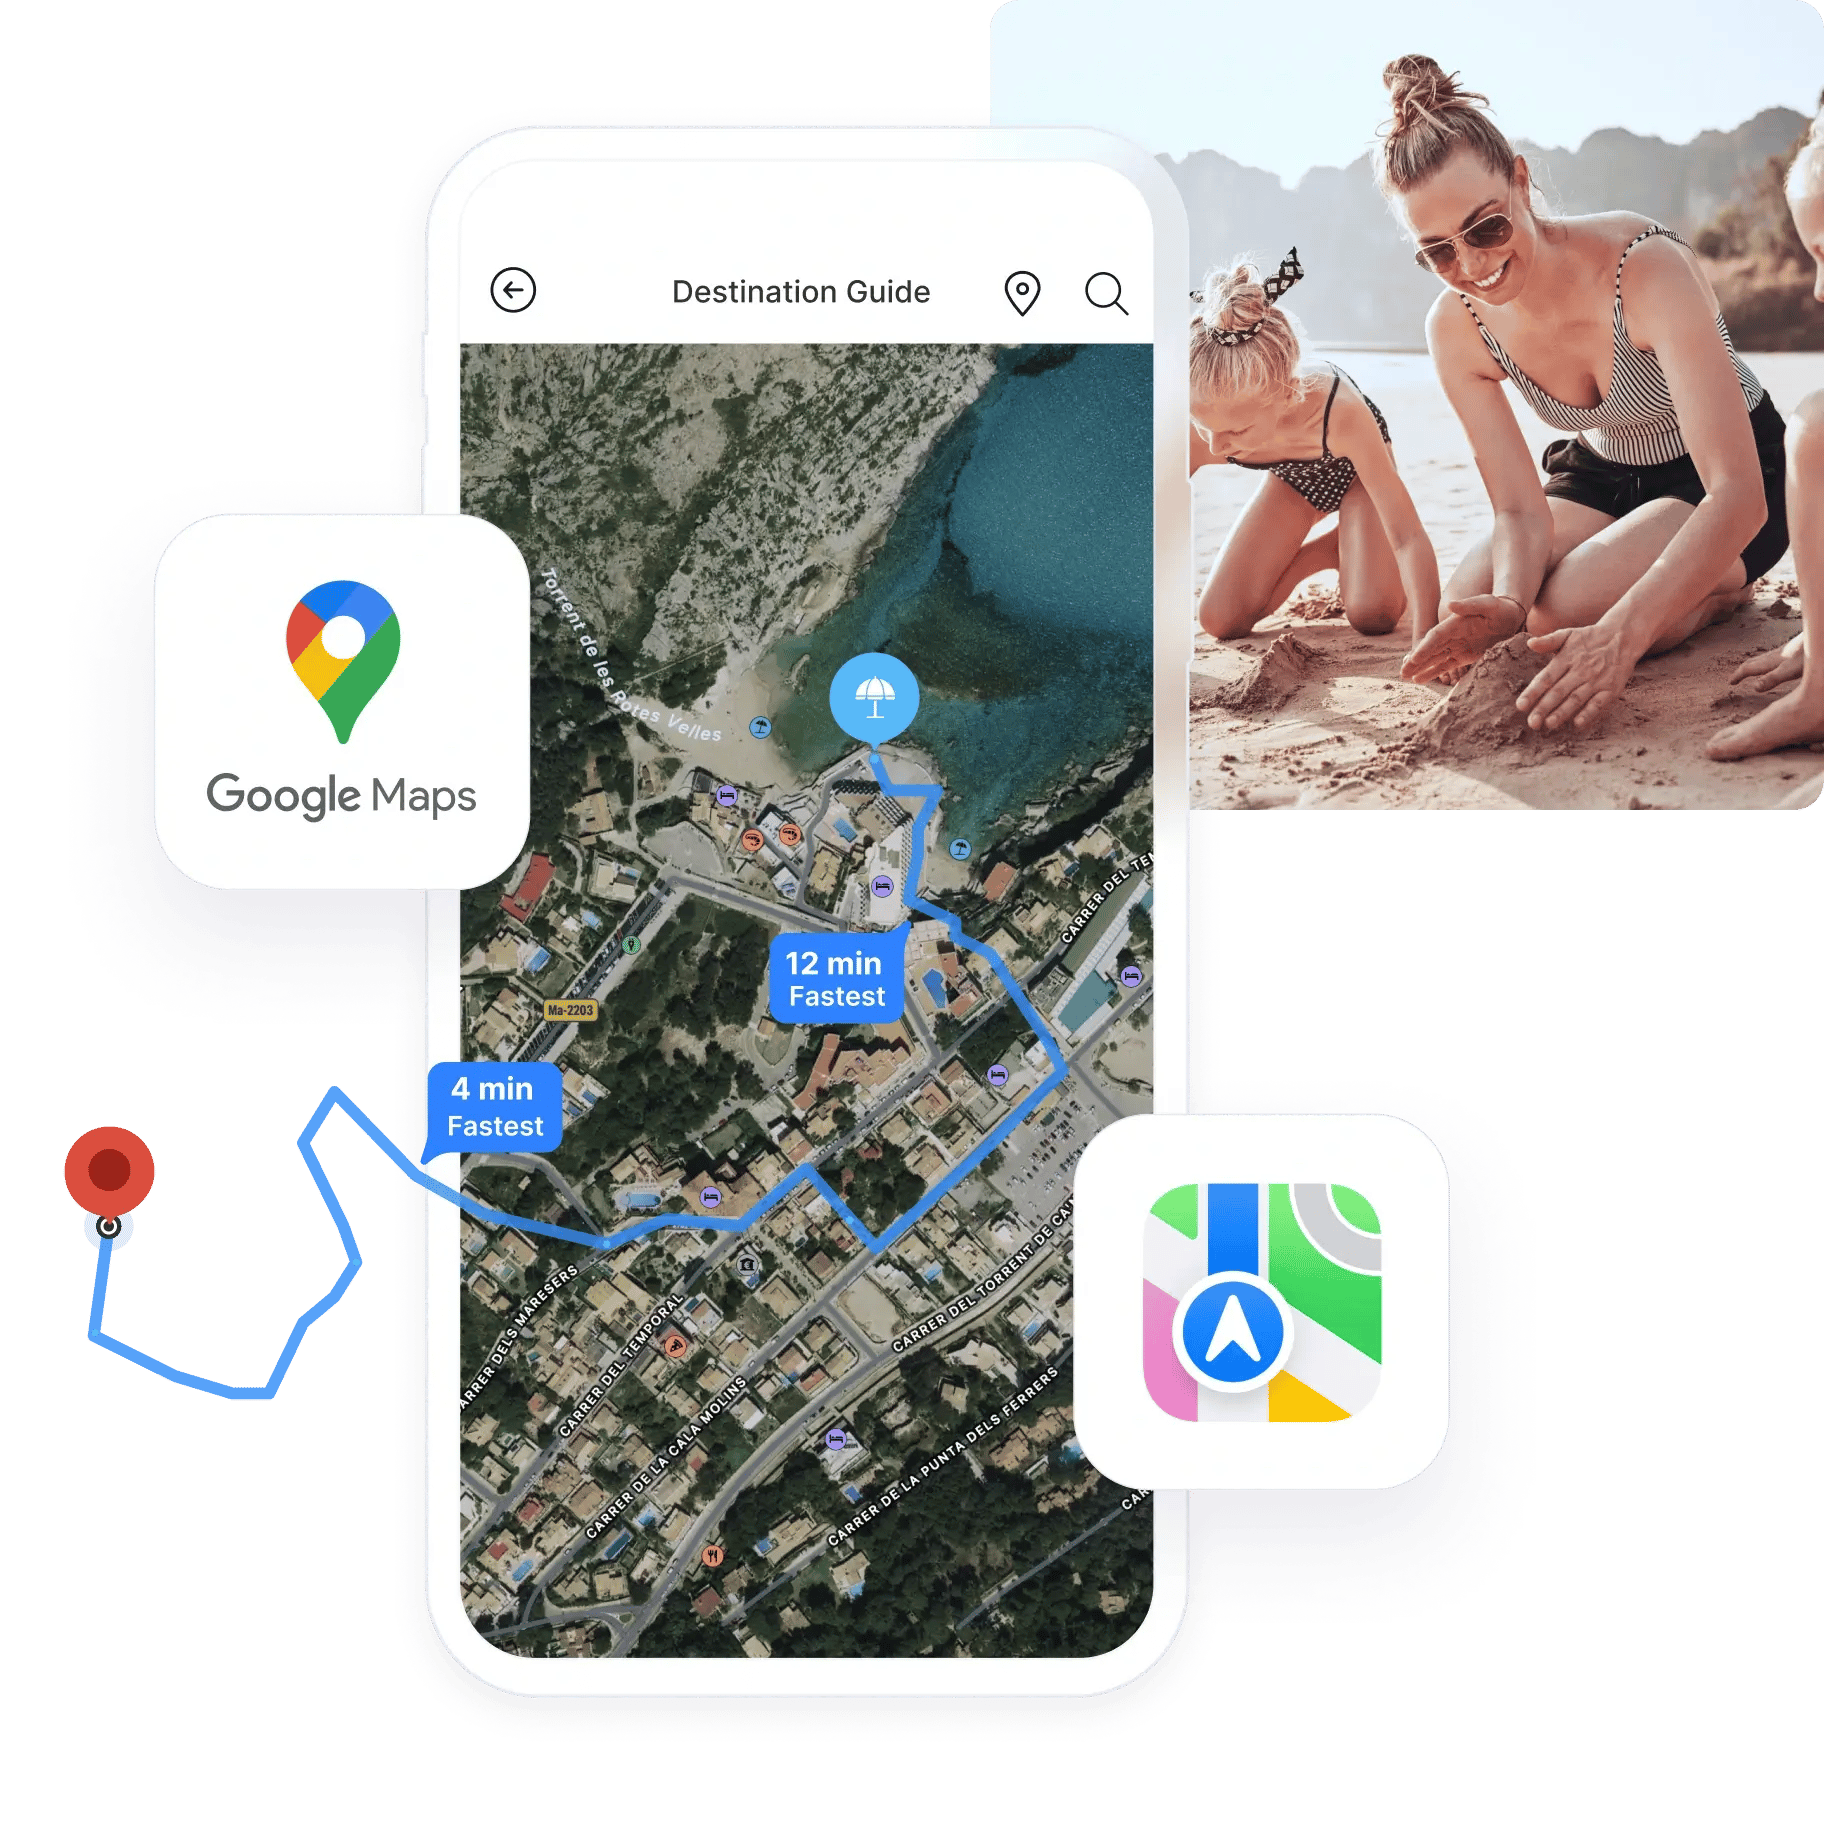 Google Maps and Apple Maps integrations